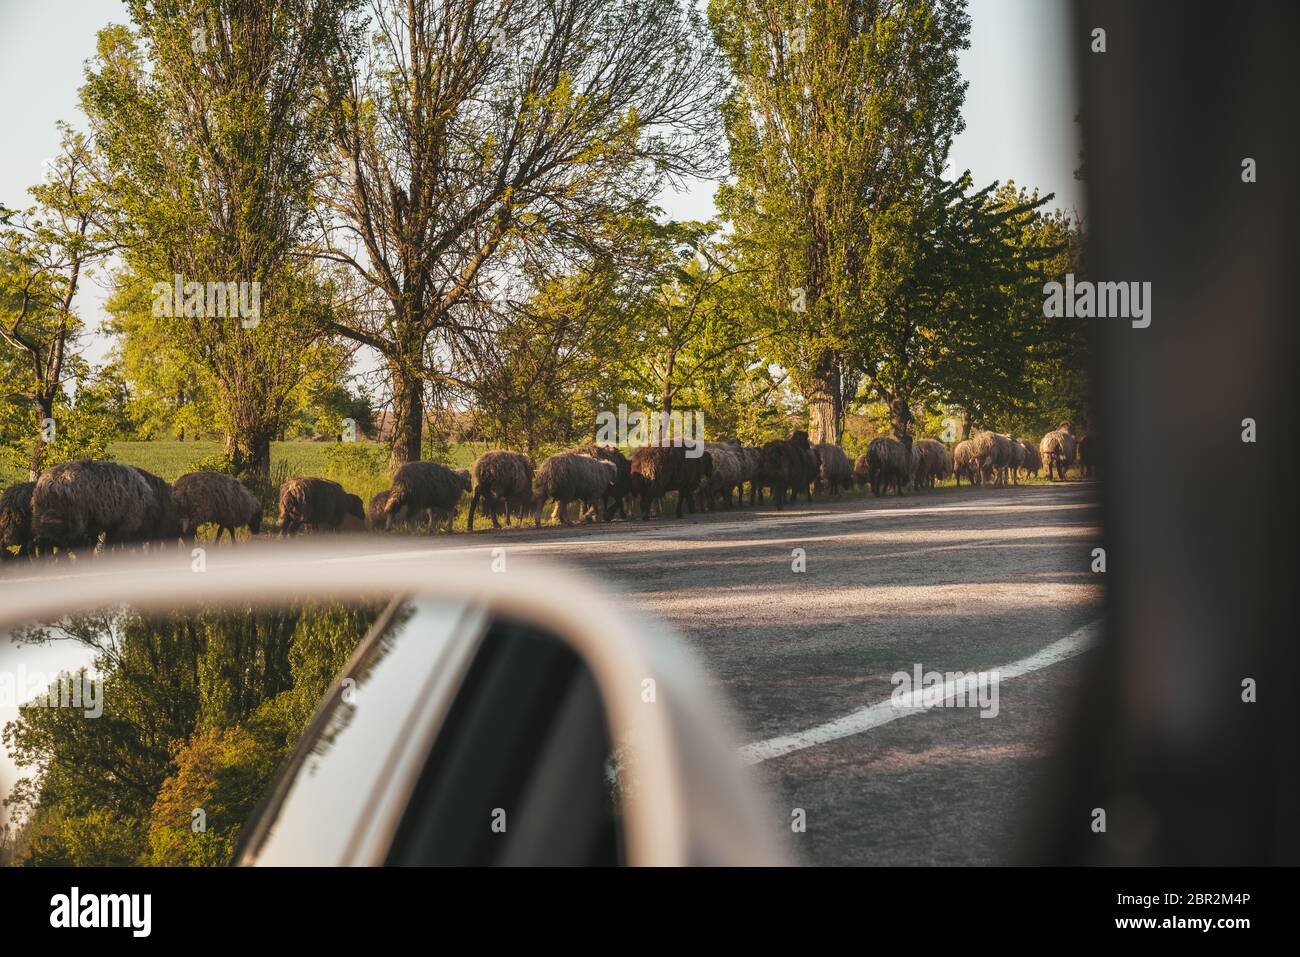 Driving along flock of sheep, view from the car Stock Photo